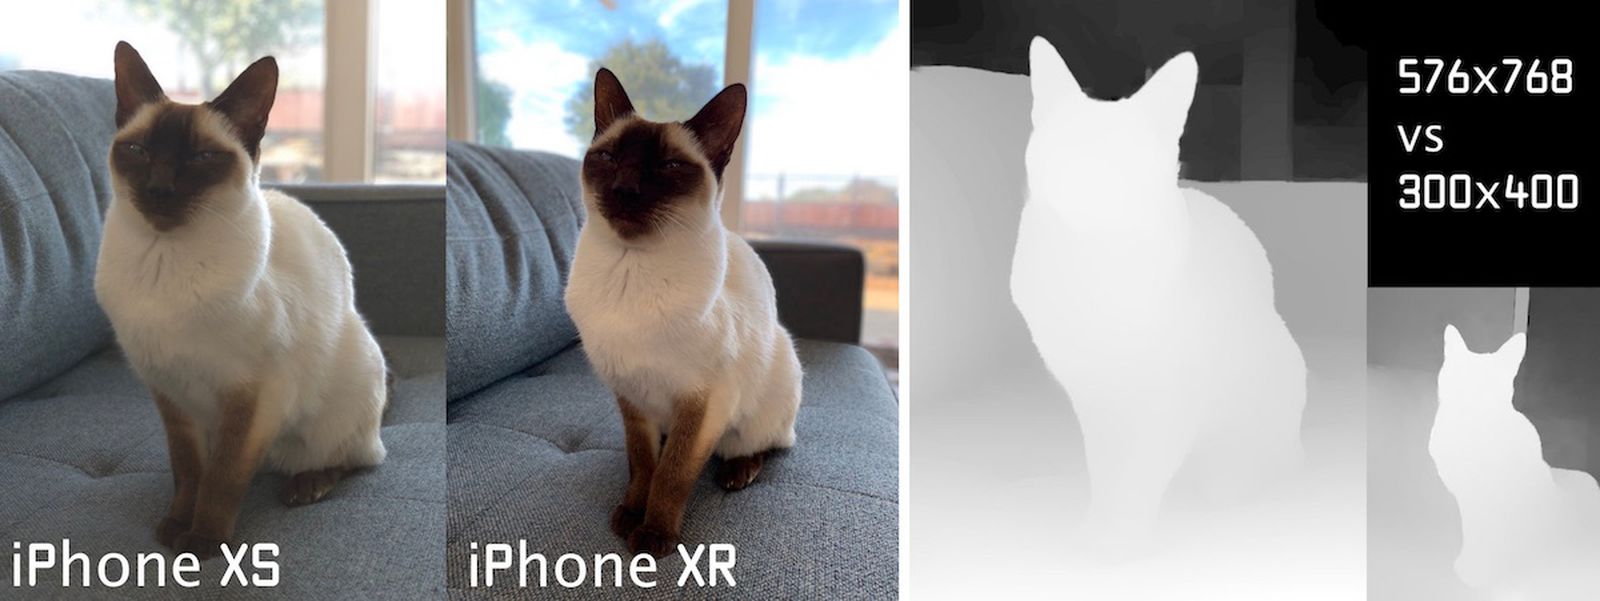 Halide Developers Enable Portrait Mode On Iphone Xr For Objects And Pets Updated Macrumors